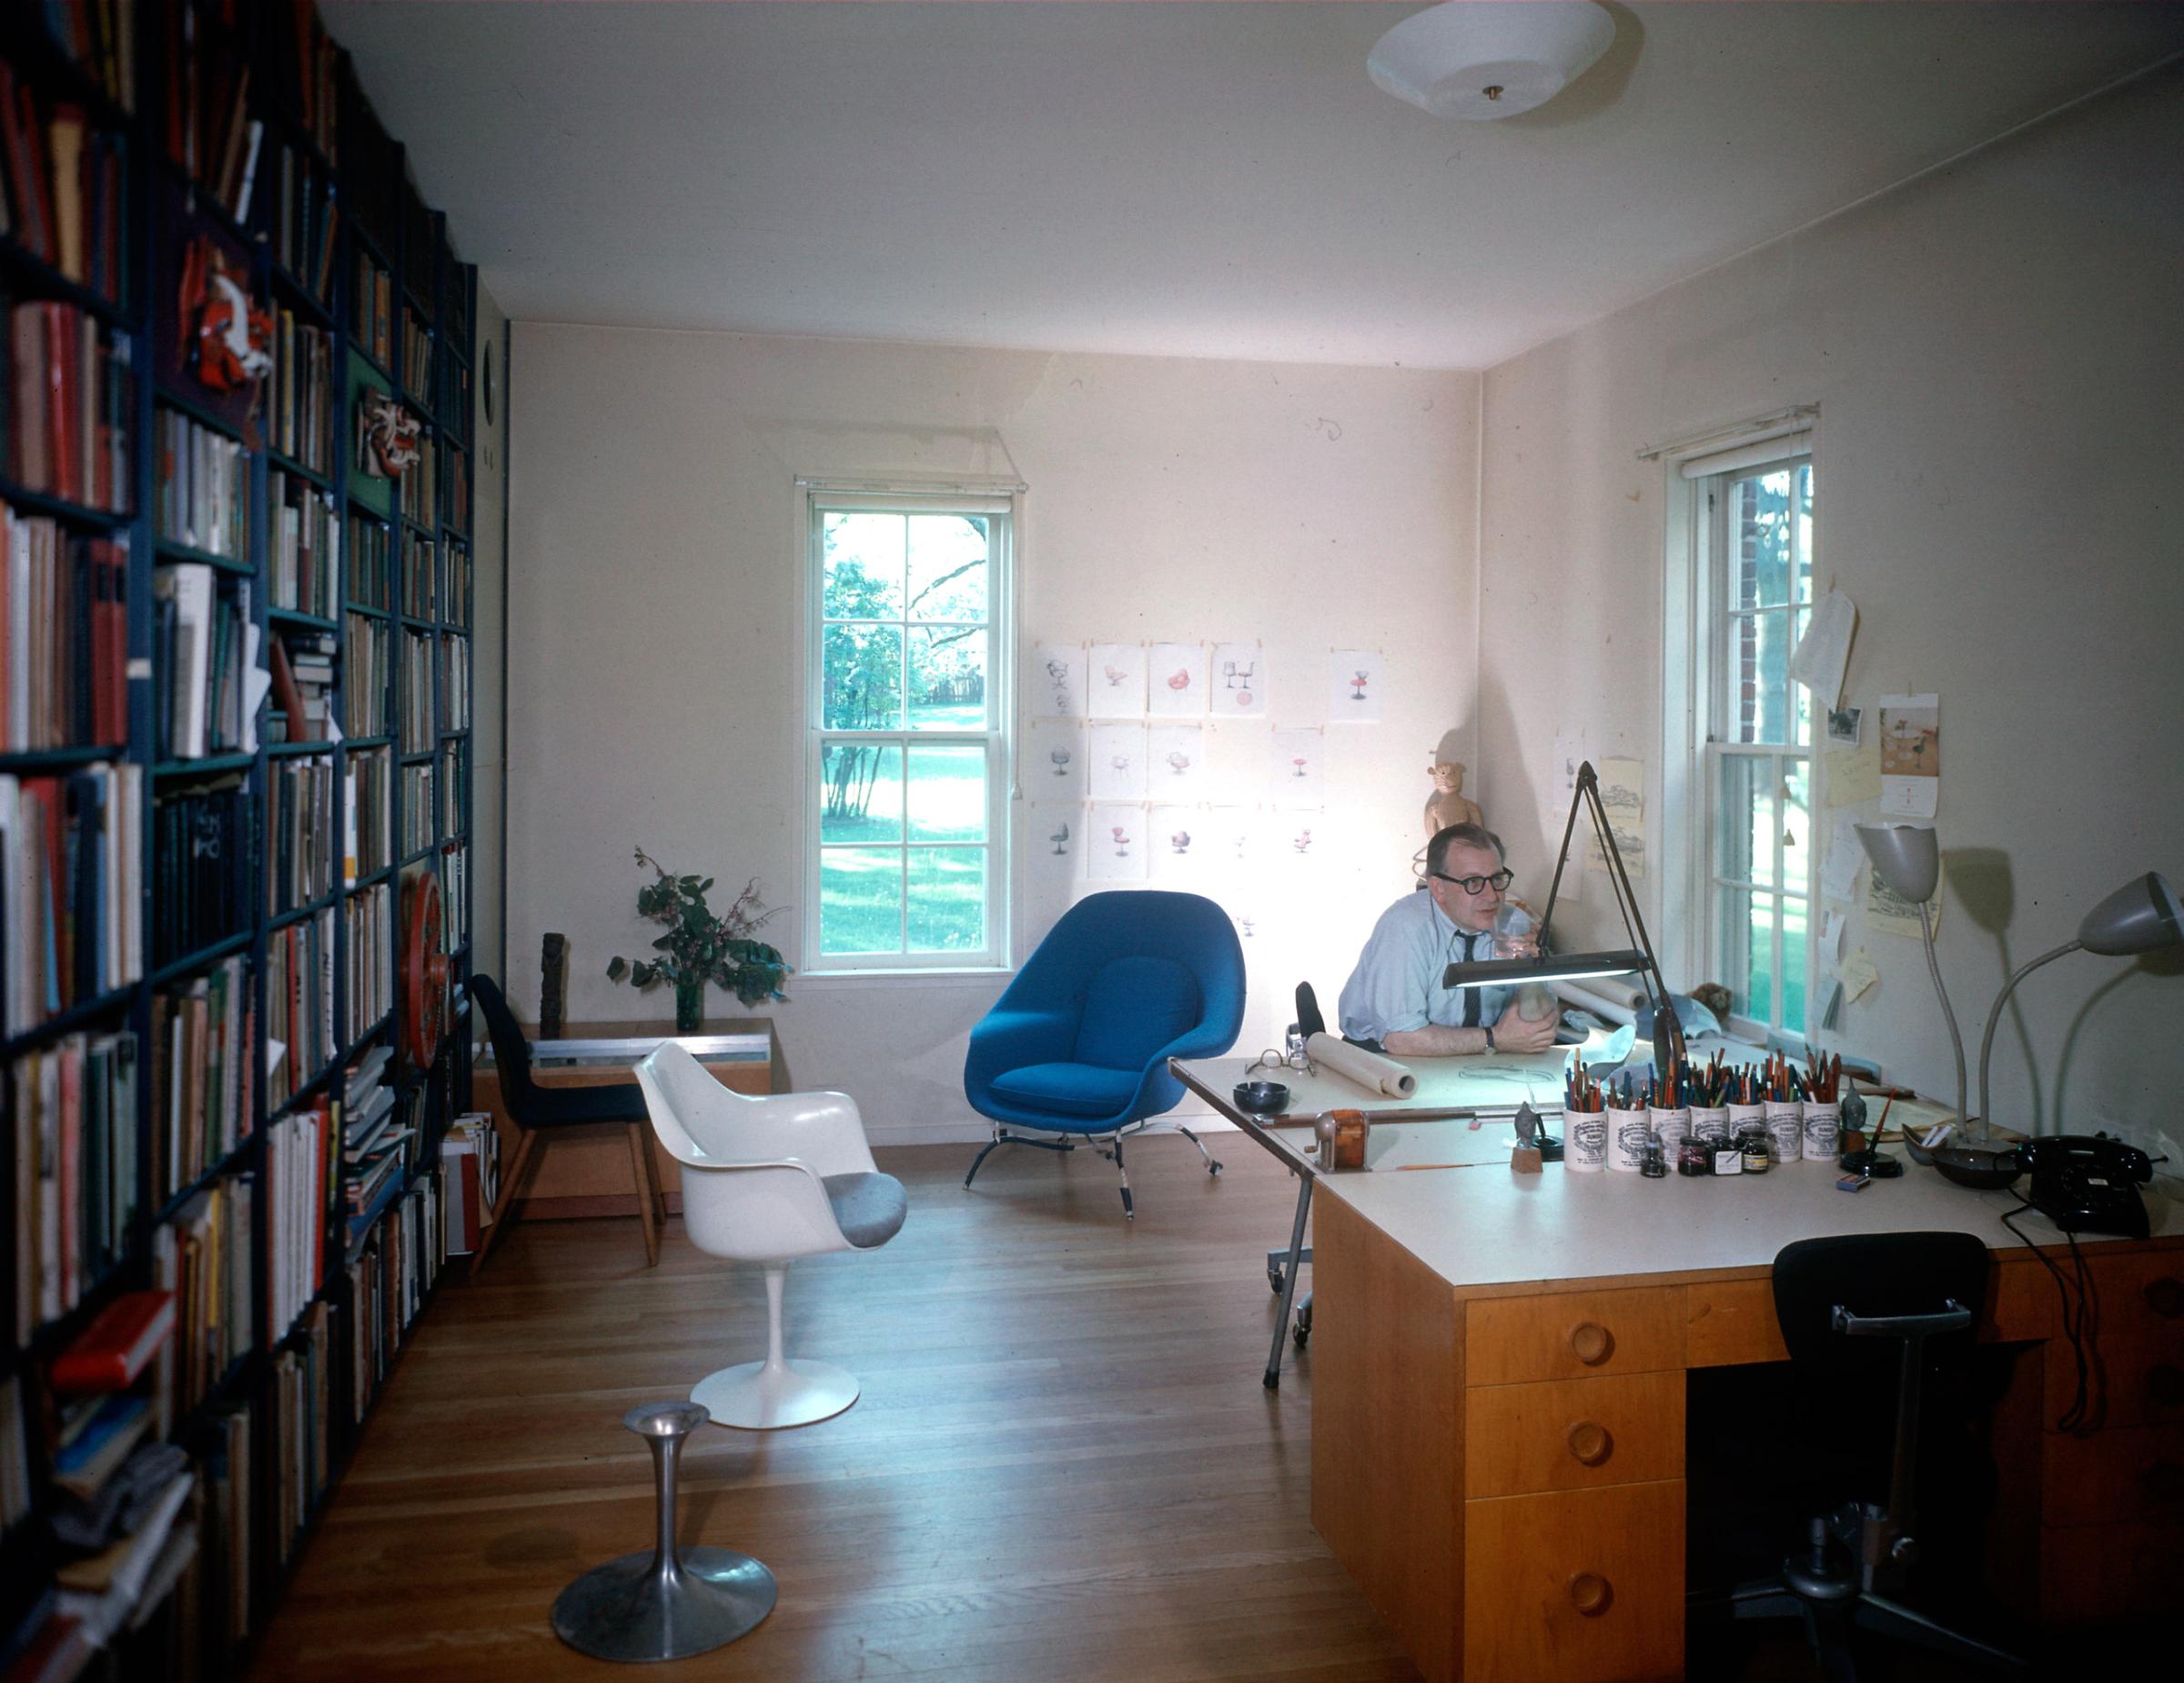 Architect Eero Saarinen at home in his study w. furniture designed by him, 1958.